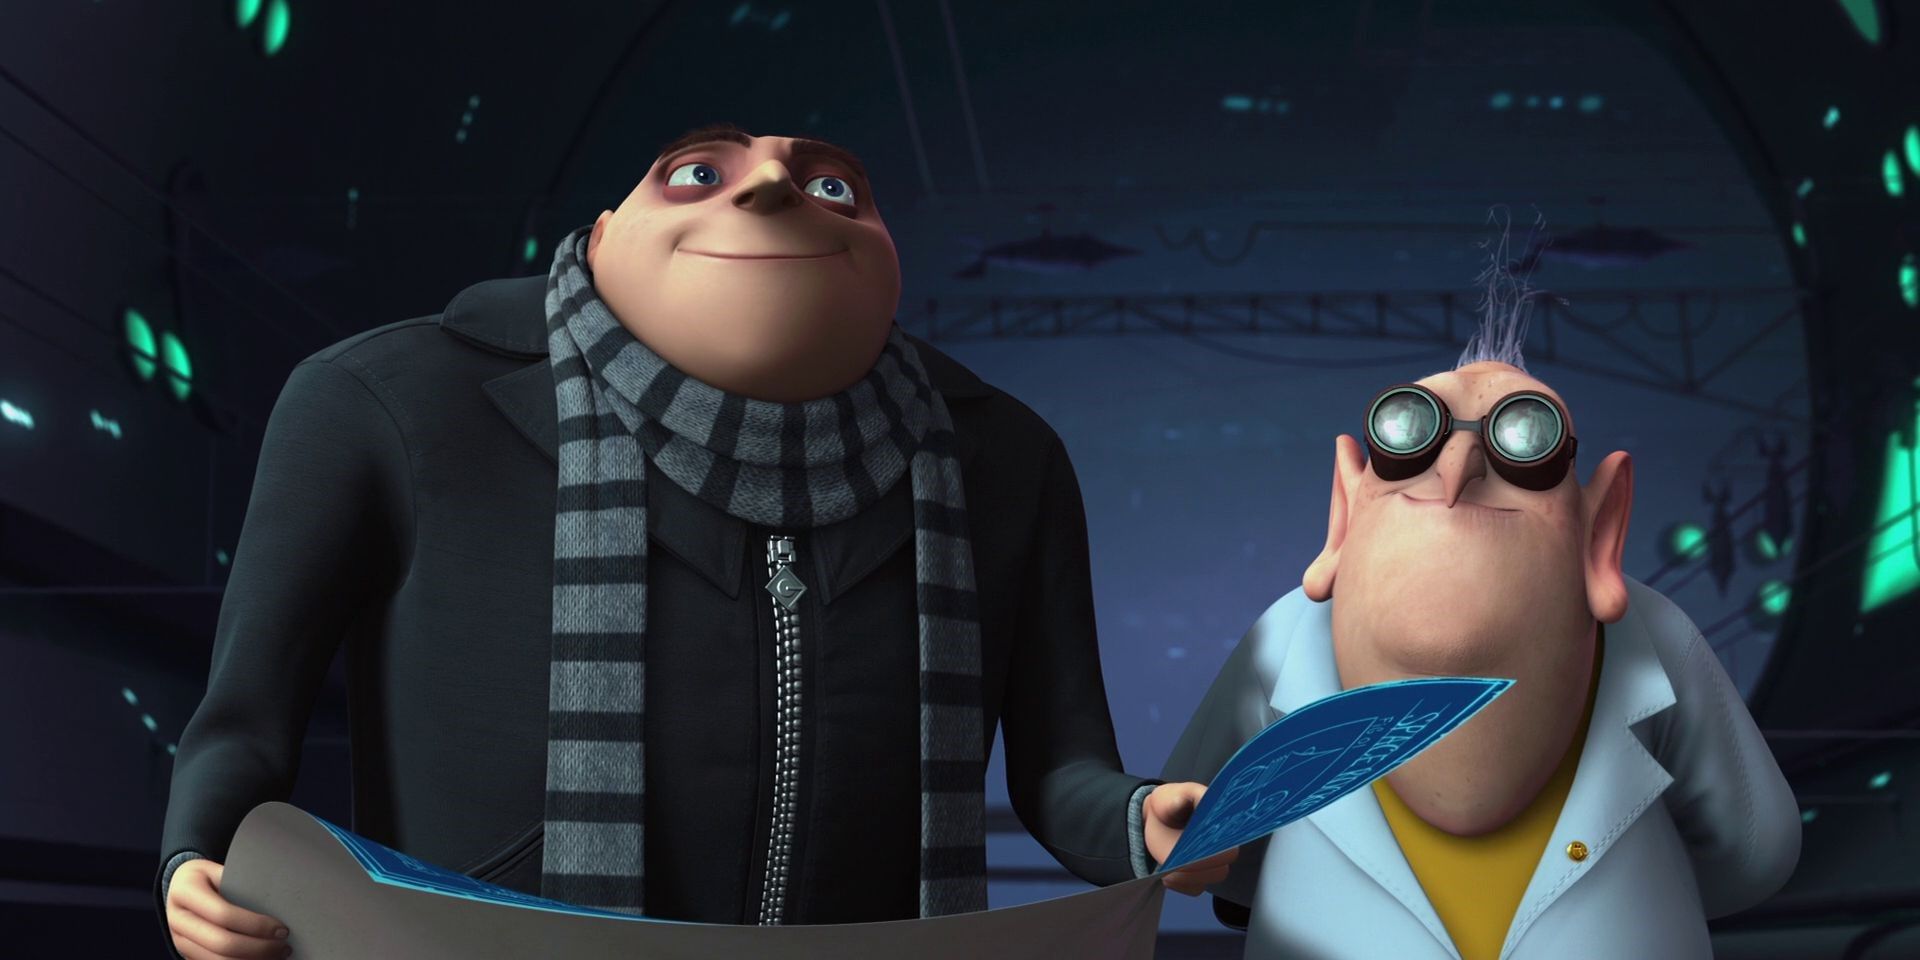 Dr Nefario and Gru look at plans in Despicable Me 3